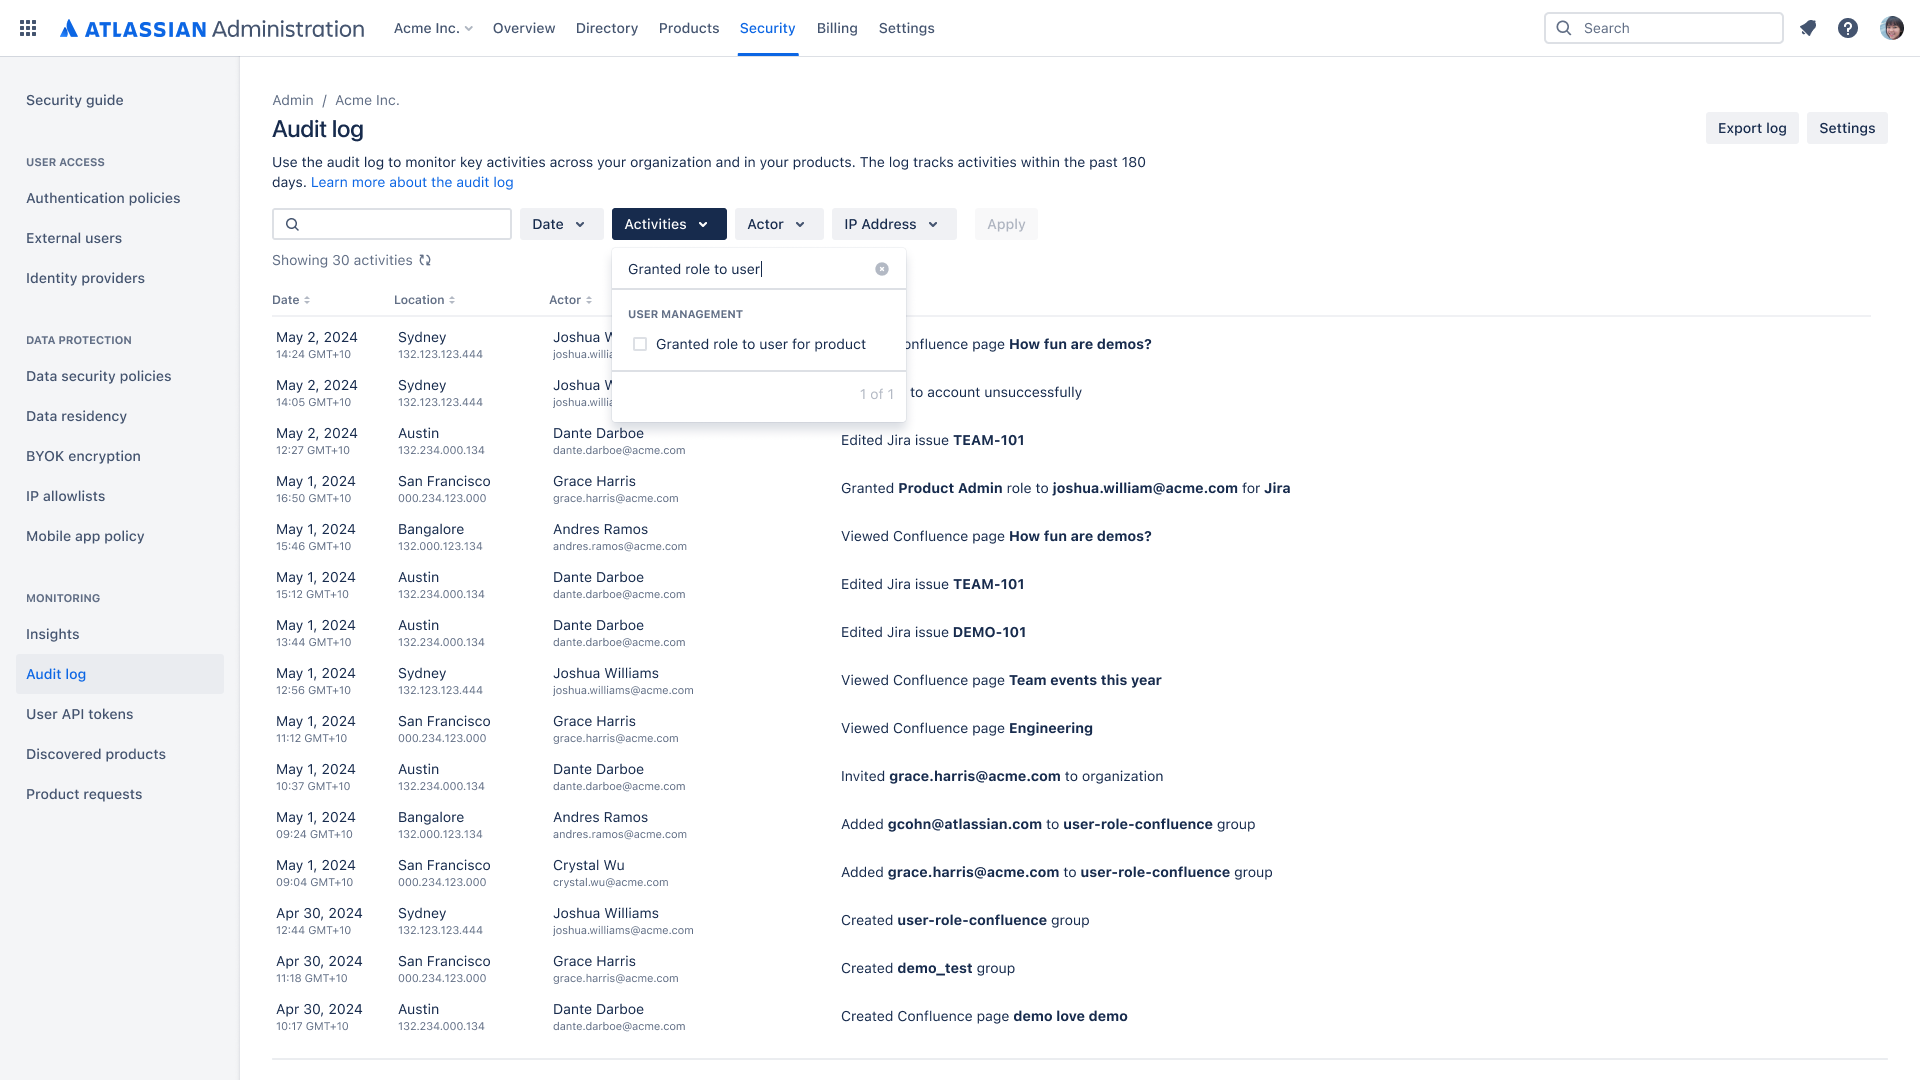 Automatic product discovery screenshot